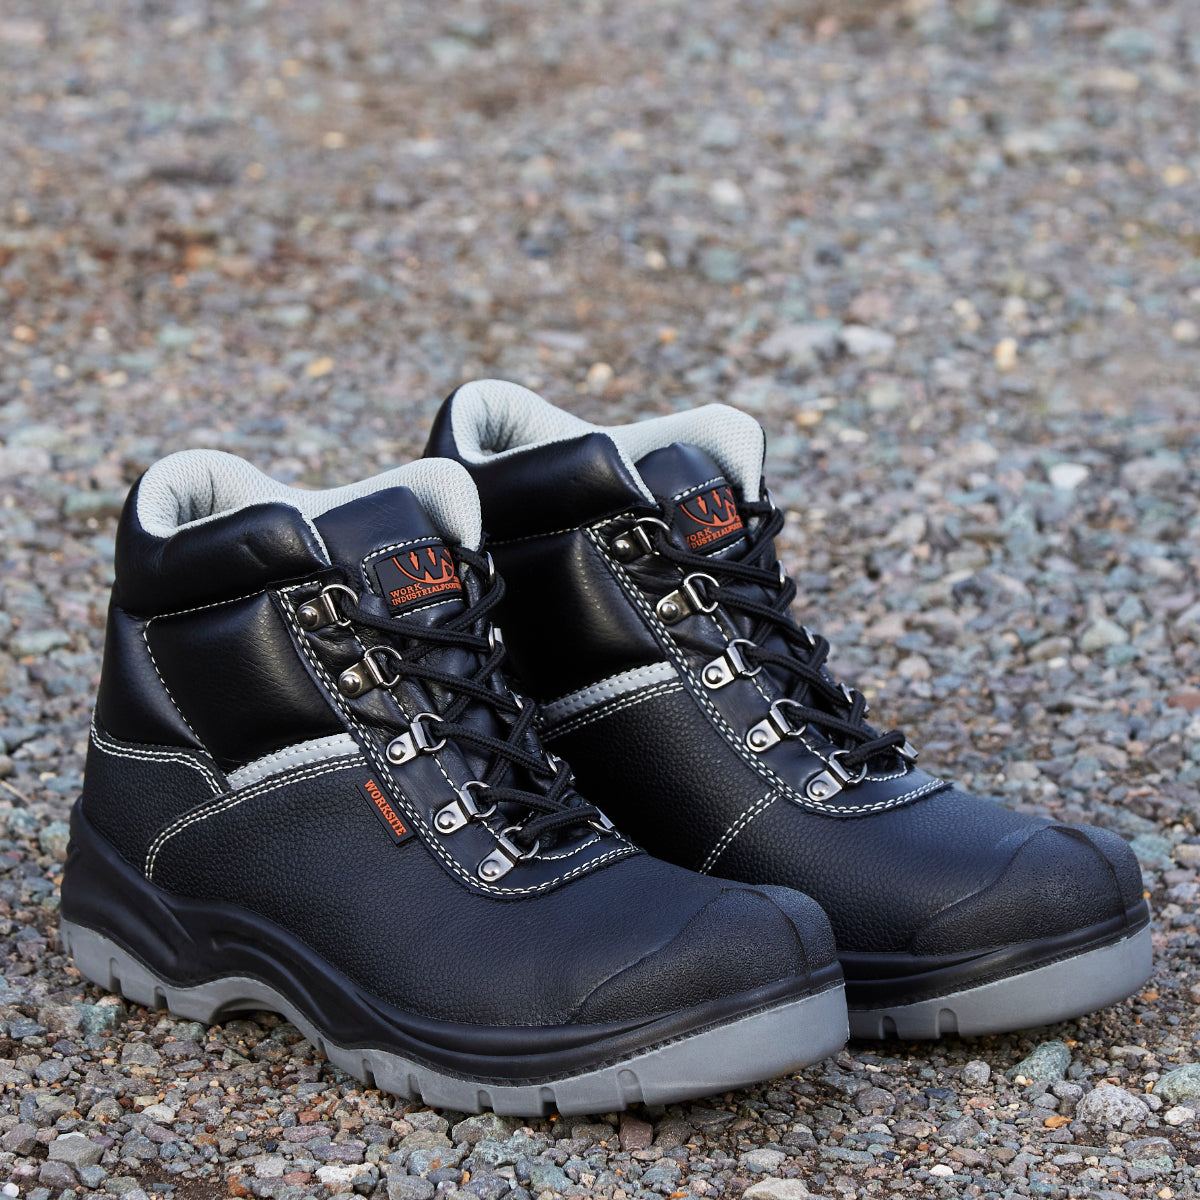 Work Site Black All Terrain Safety Boot